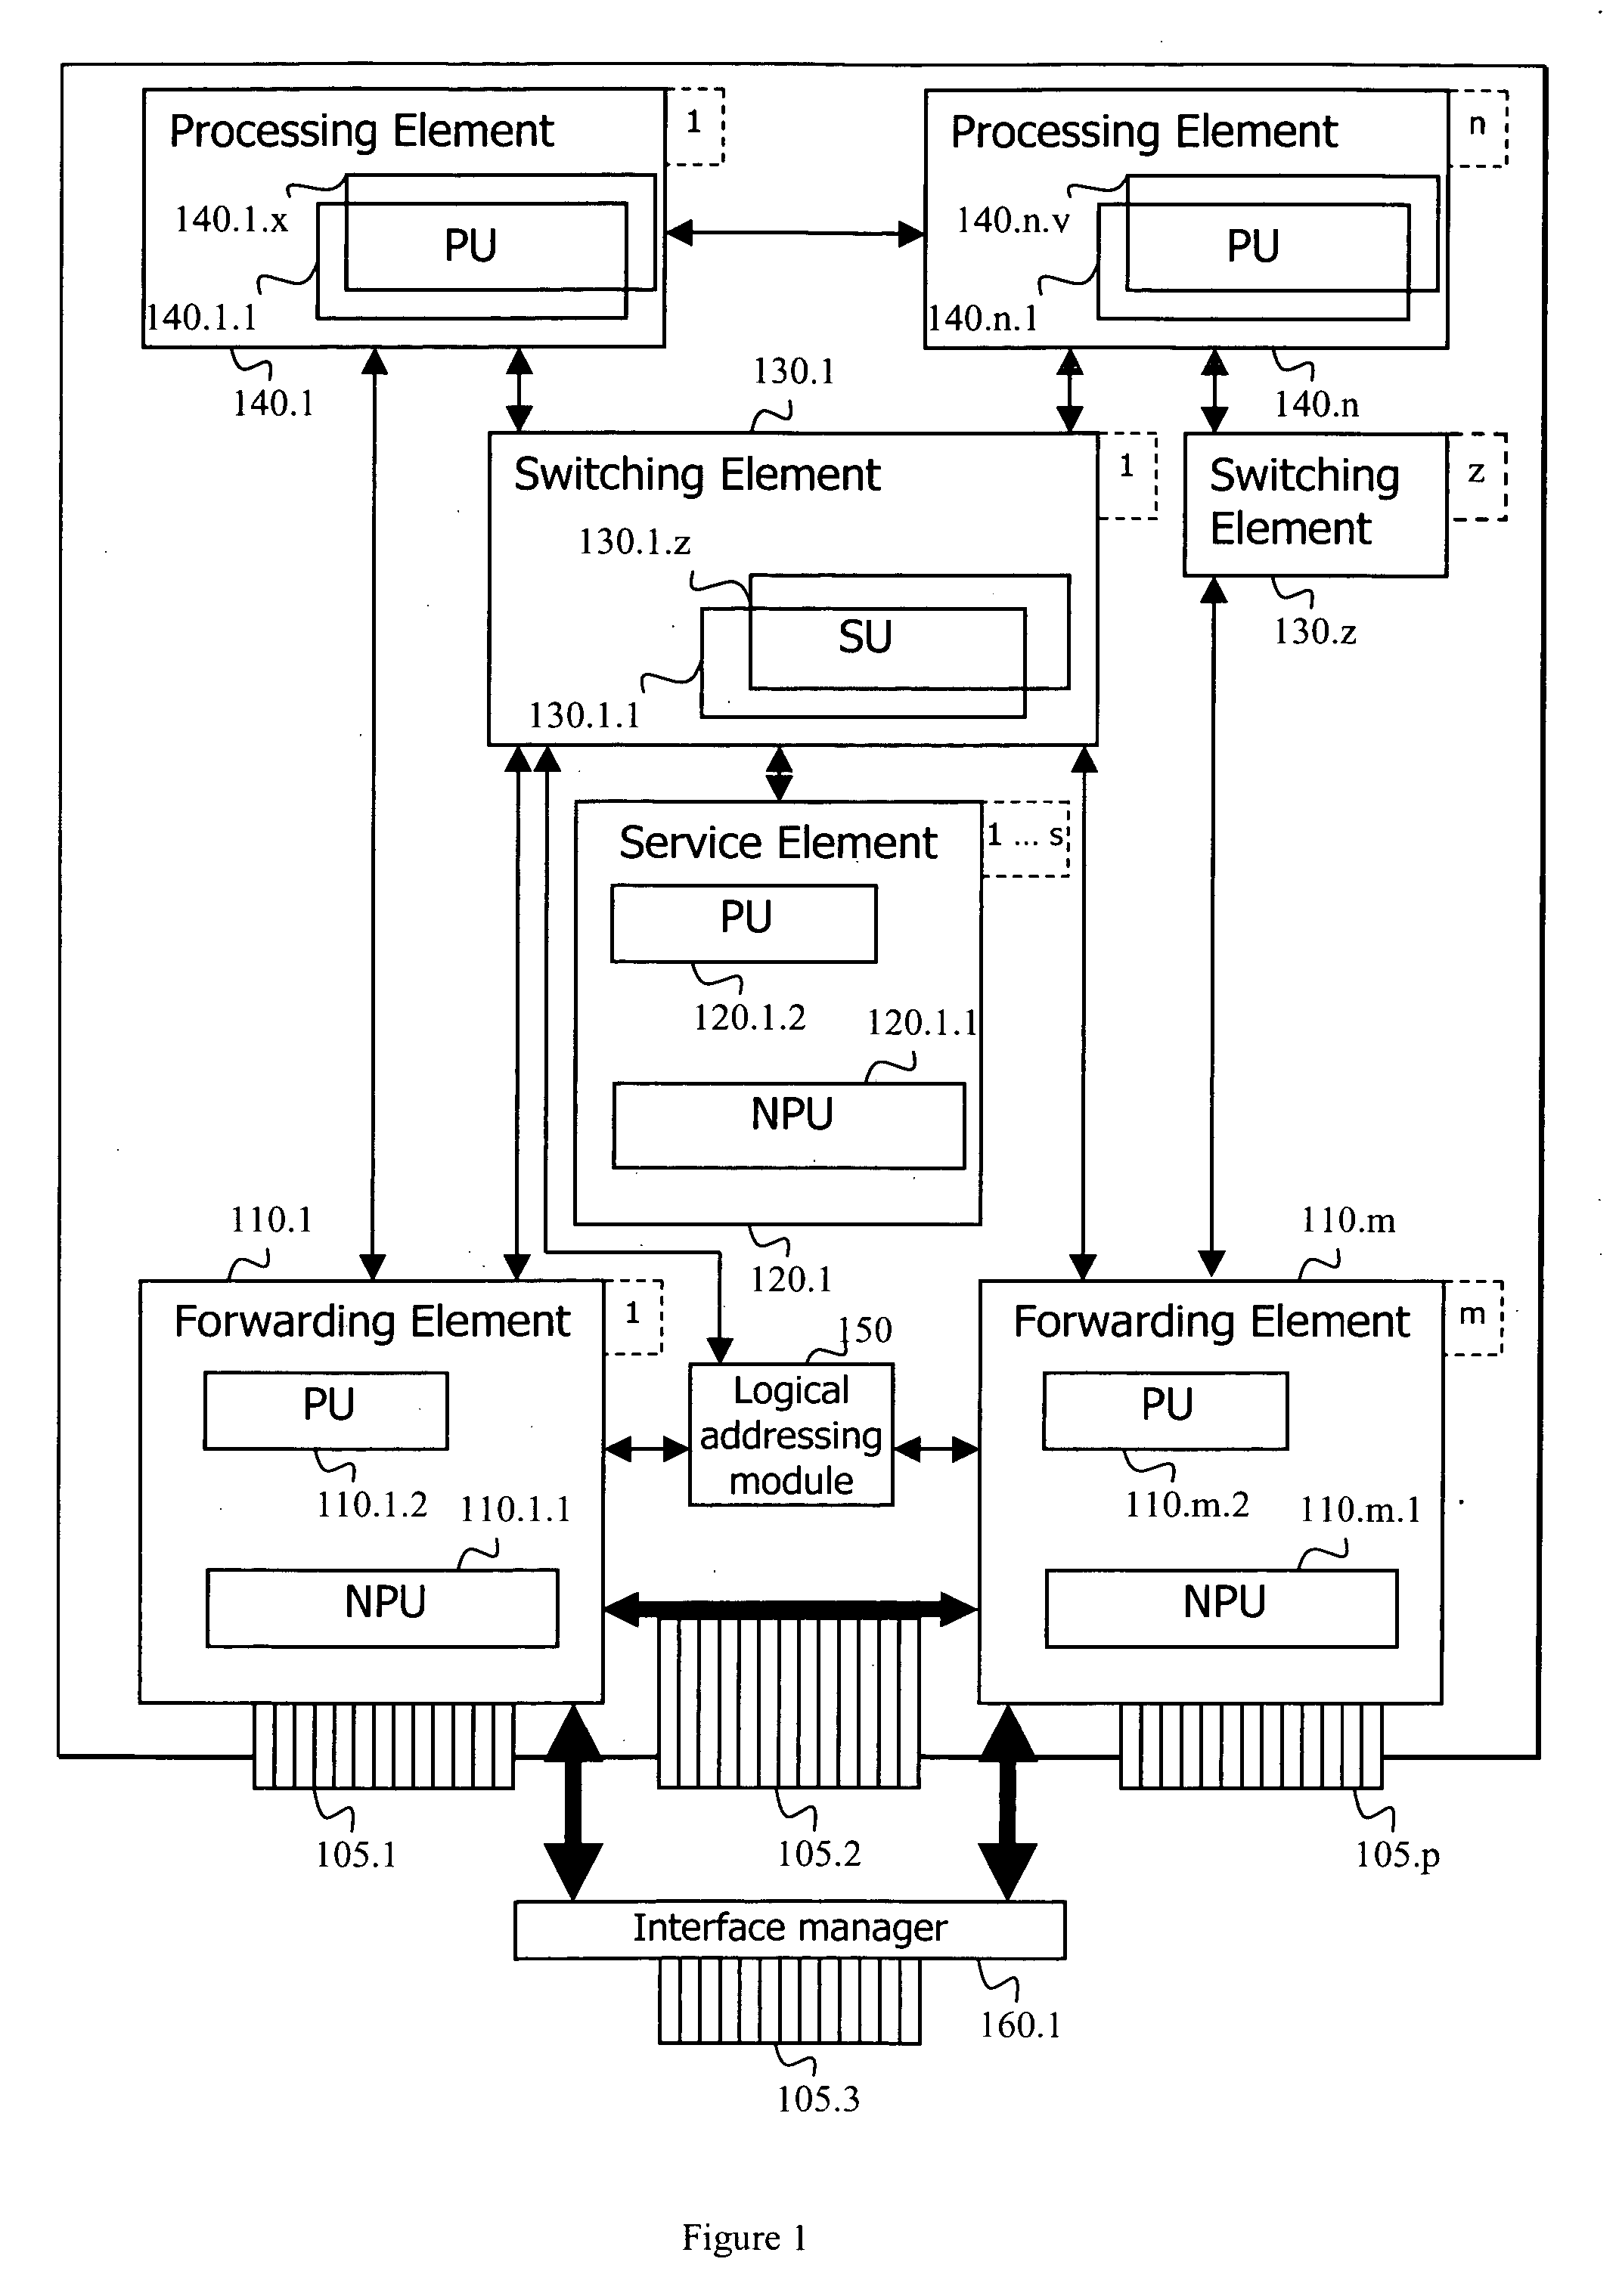 Adaptive router architecture using logical internal addressing